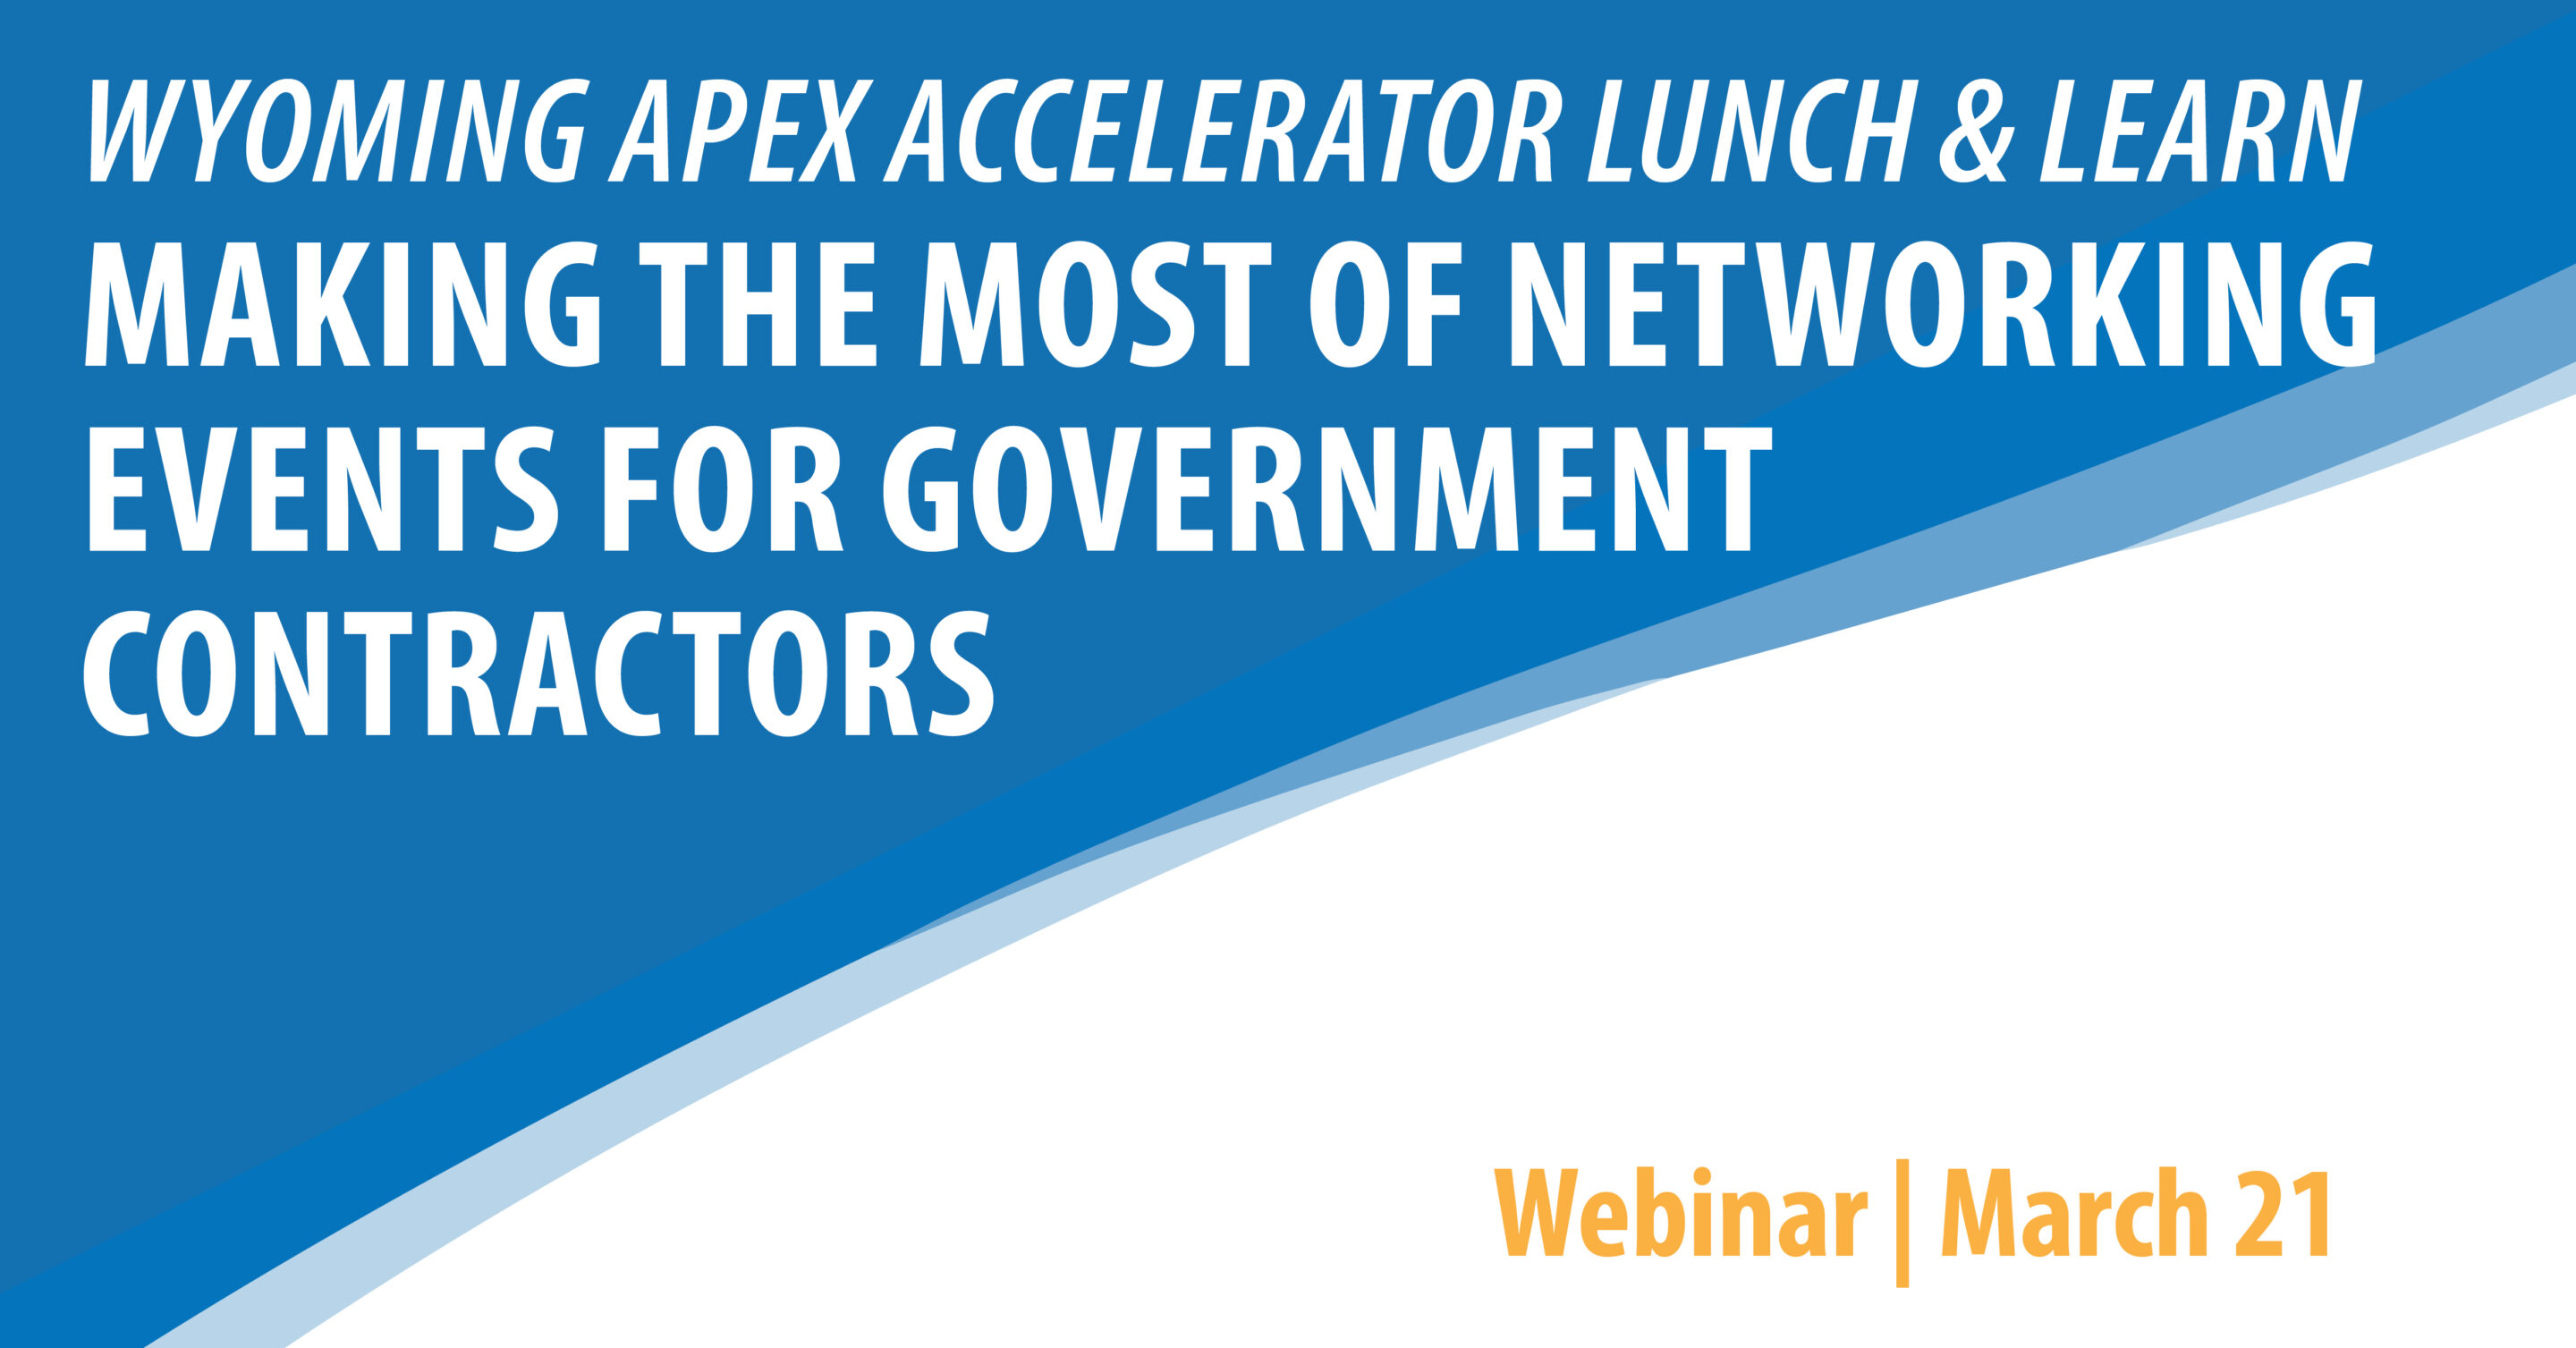 Wyoming APEX Accelerator Lunch & Learn: Making the most of networking events for government contractors